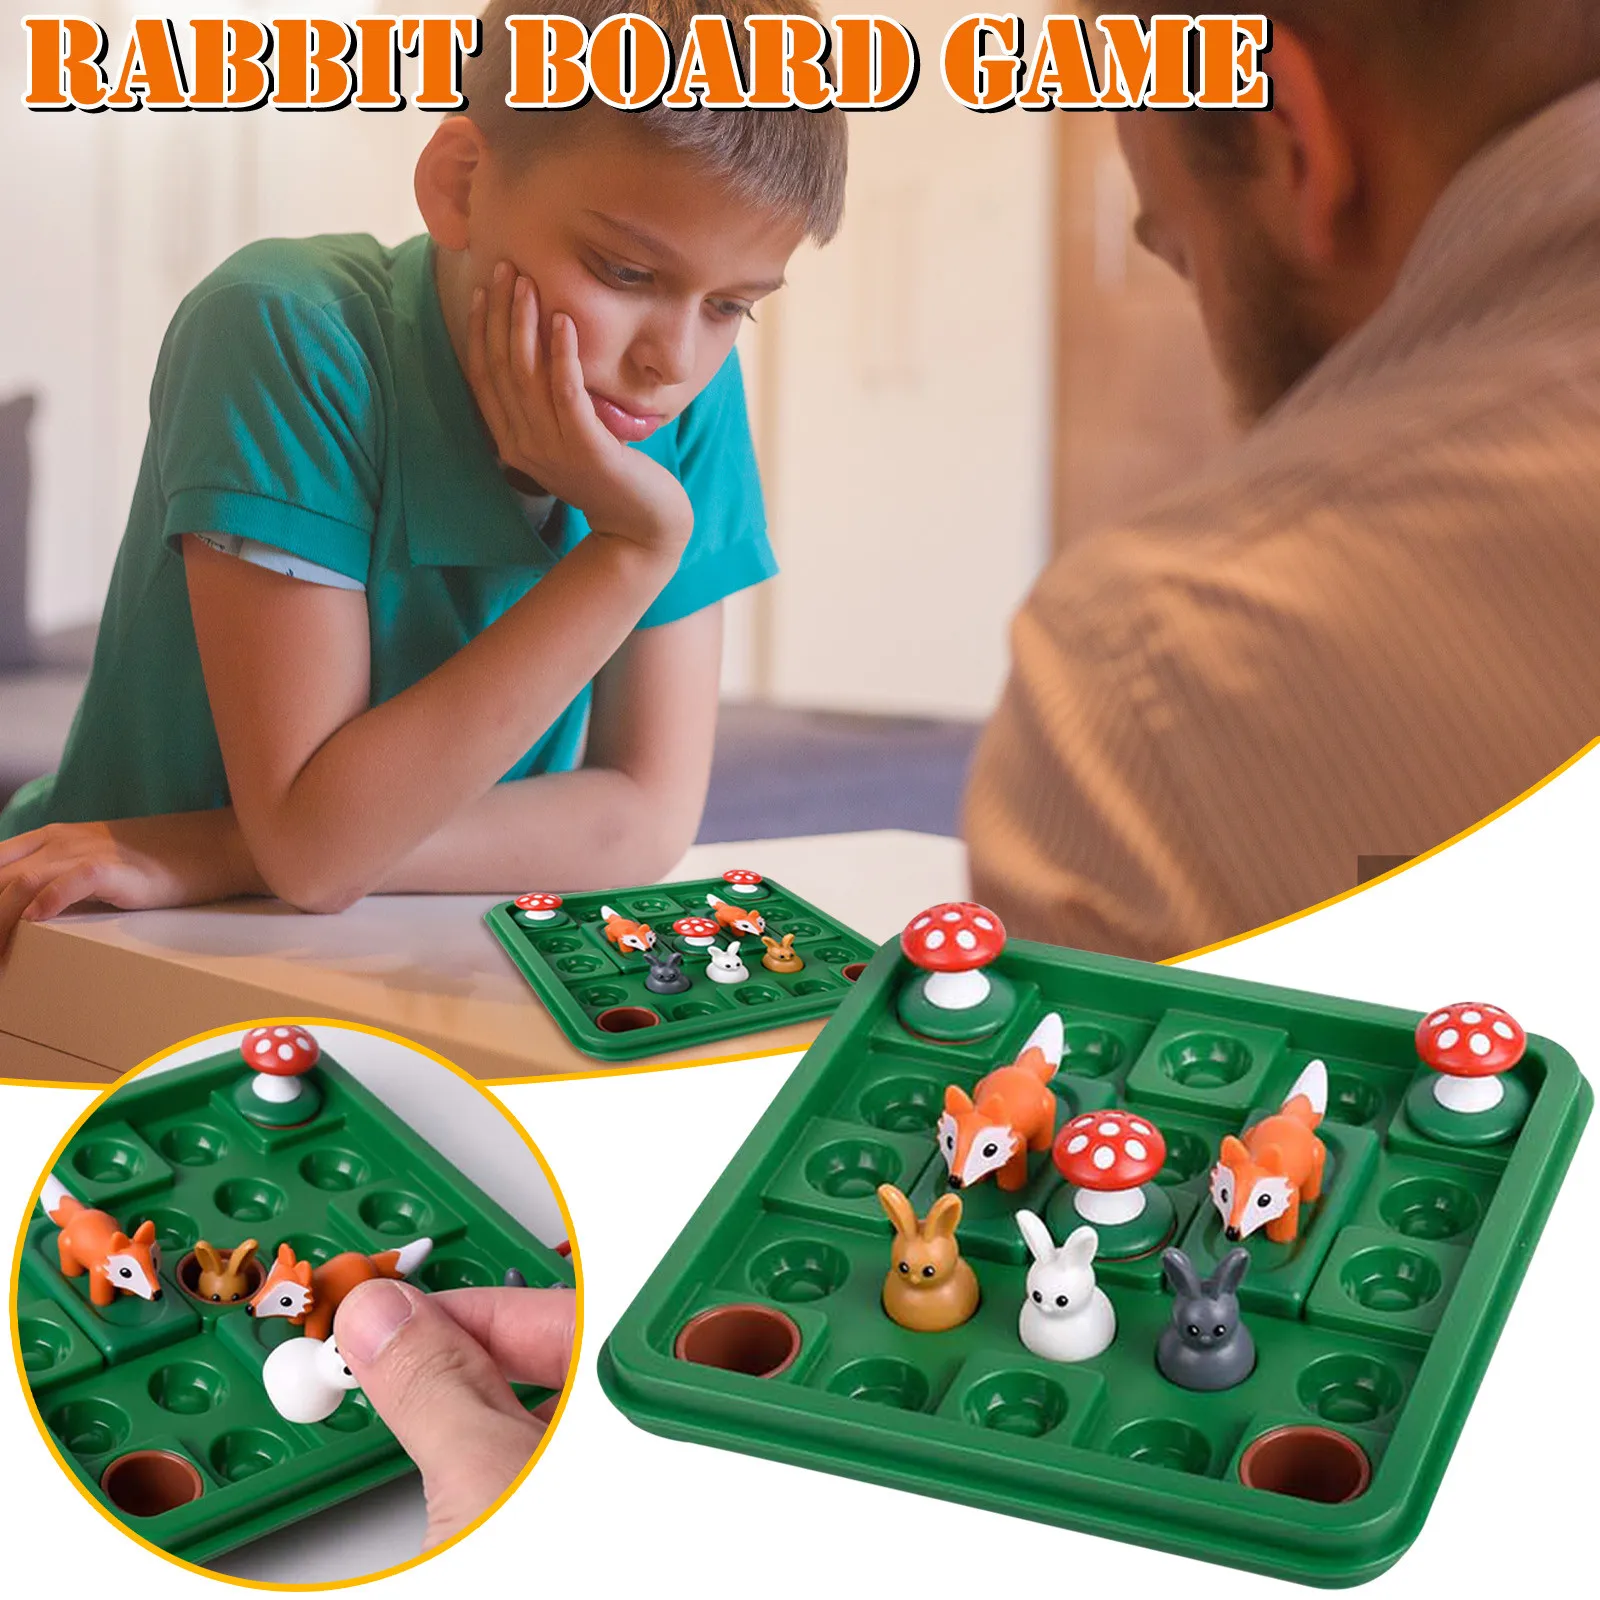 

Rabbit board game Bunny Bounce Game Chess Children Number Puzzle Board Thinking Training Toy Drinking Prop KTV Pub Bar Party